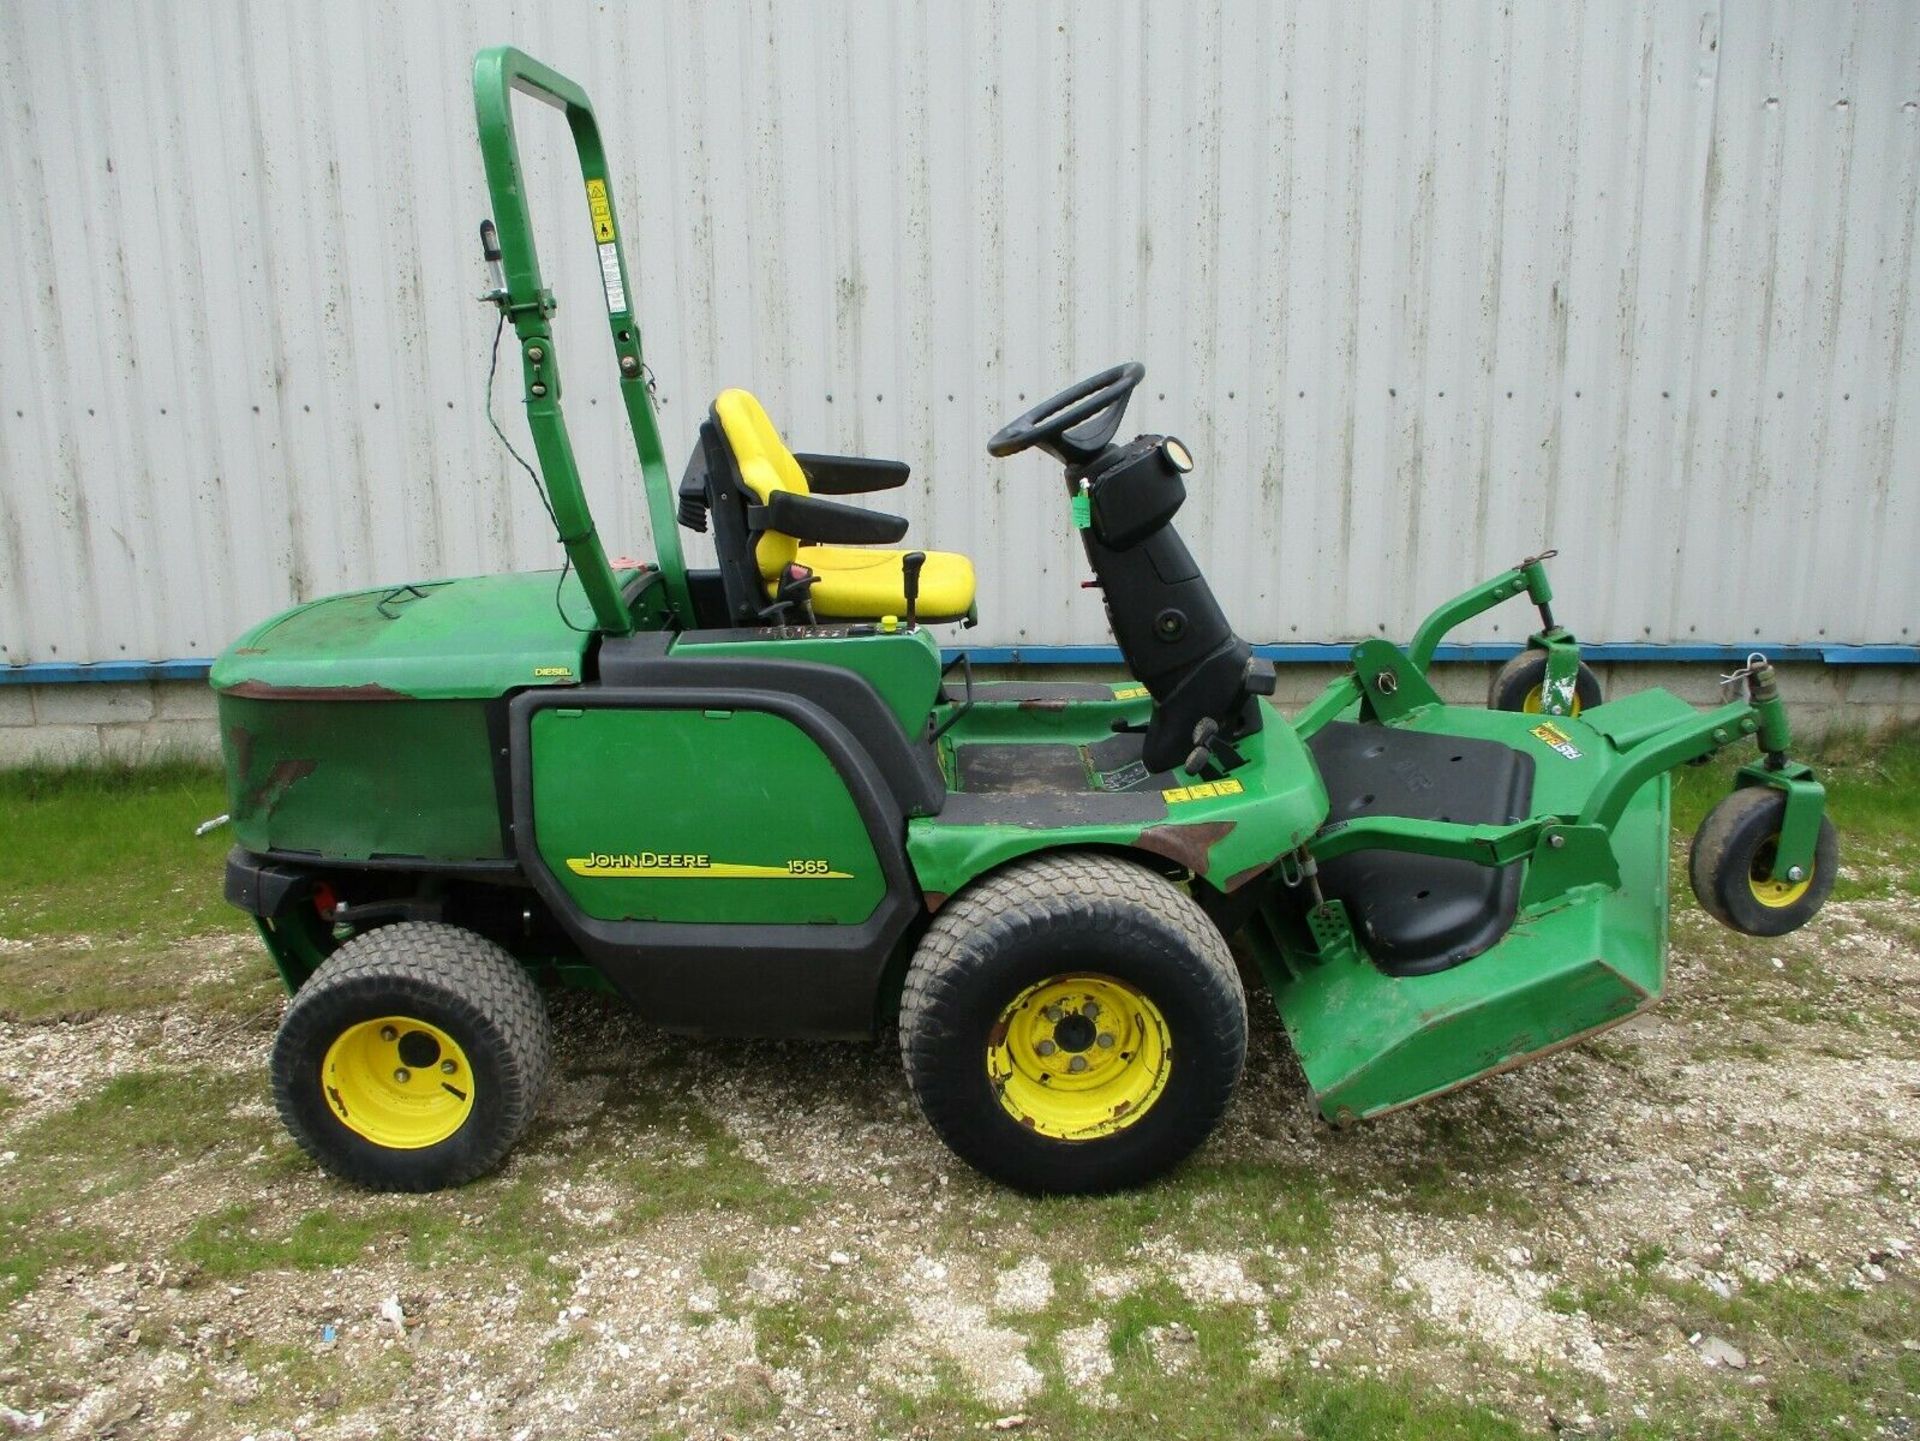 John Deere 1565 Out Front Ride On Lawn Mower - Image 3 of 9